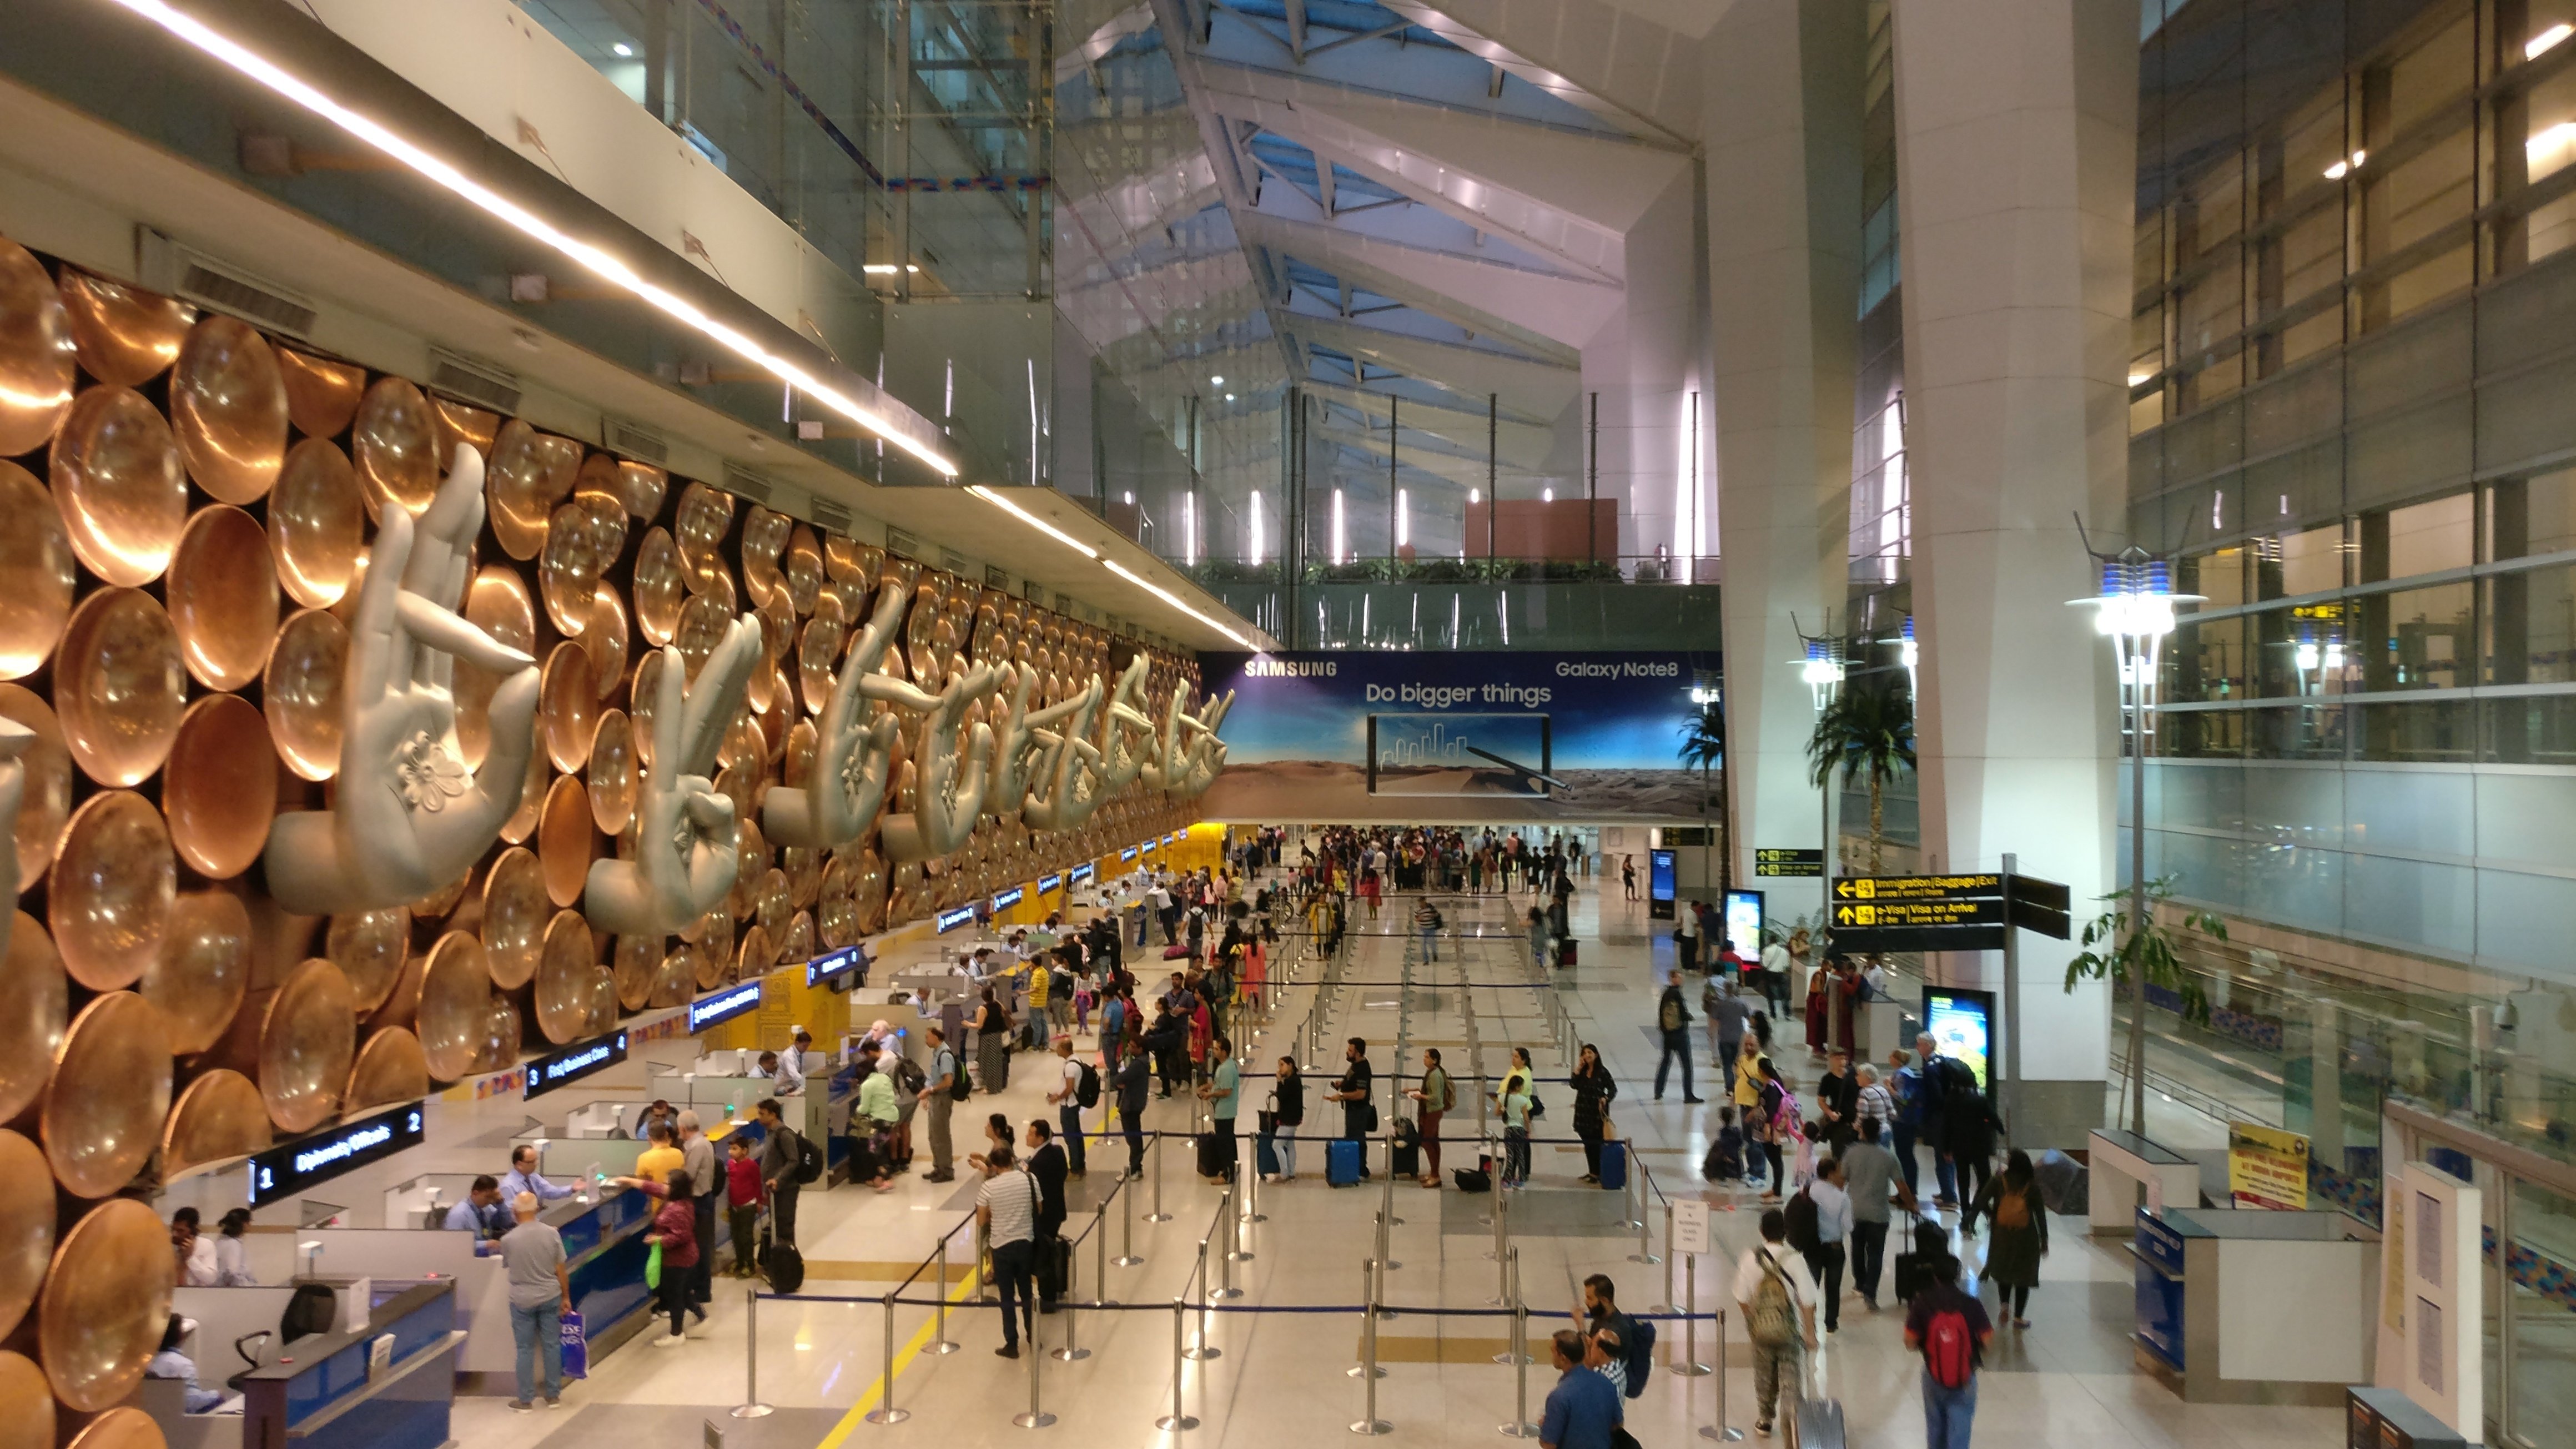 A woman arrested delhi airport for smuggling Heroin worth 7 crore